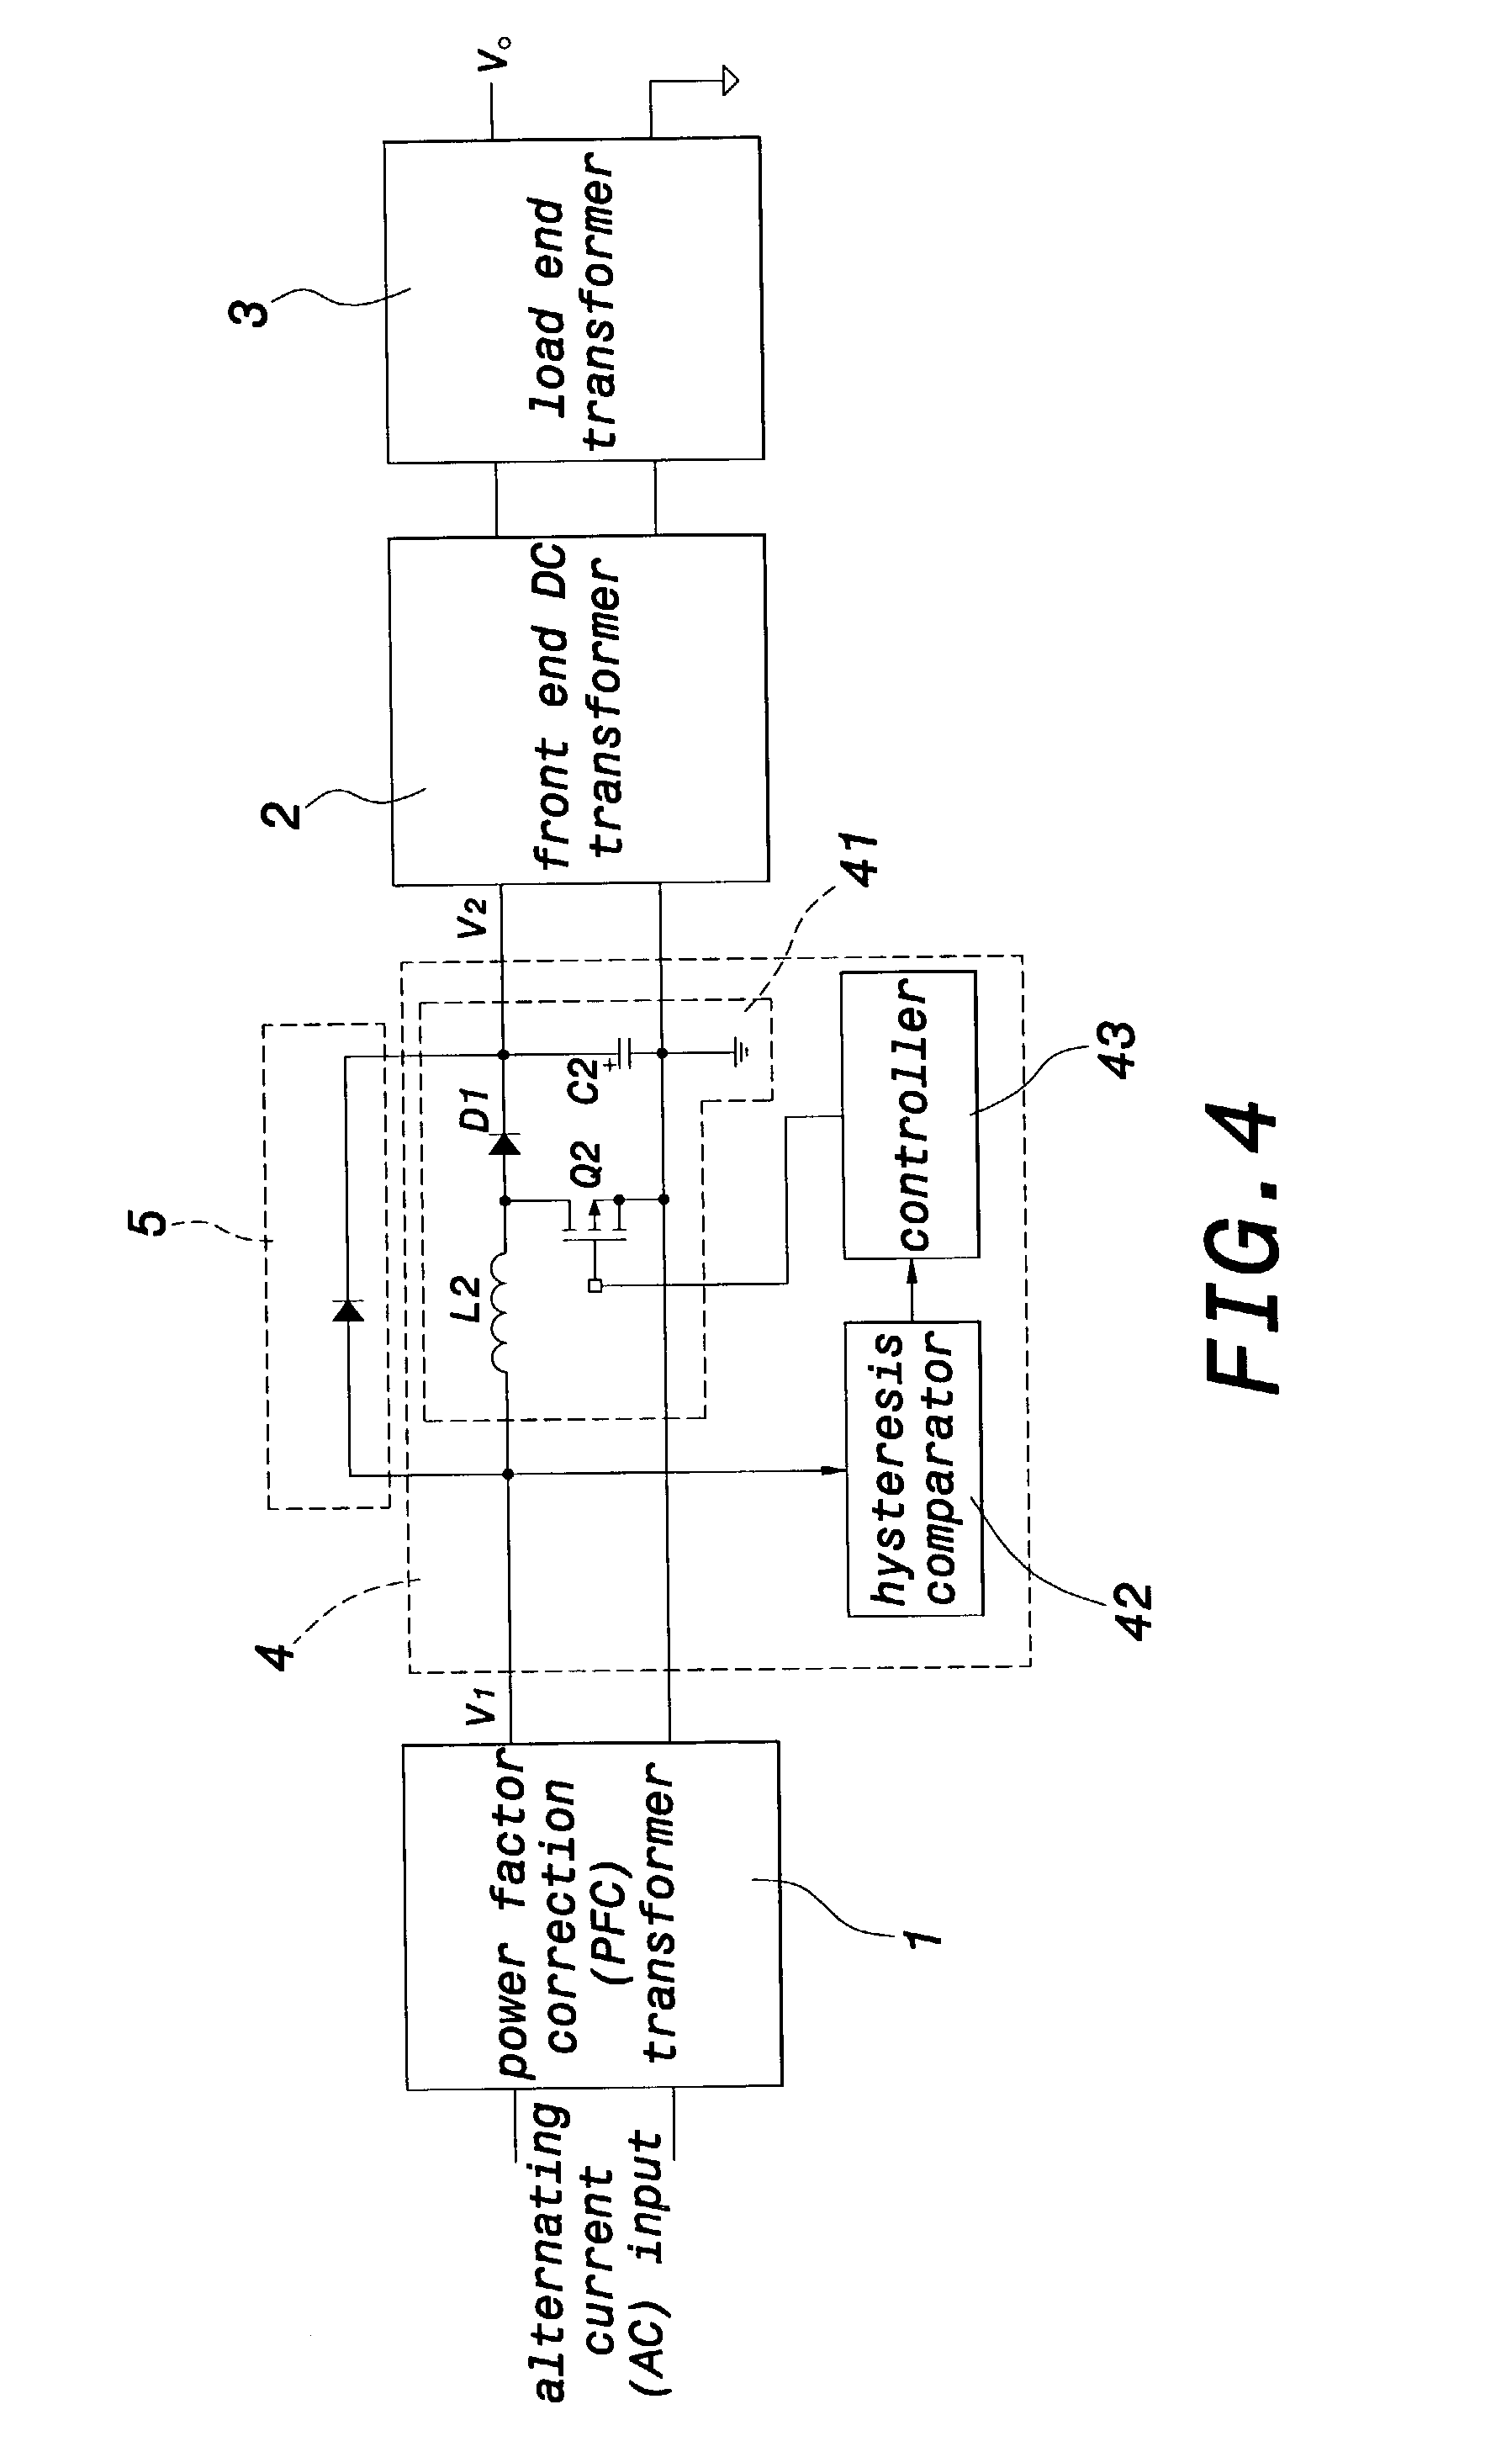 Power system for supplying stable power